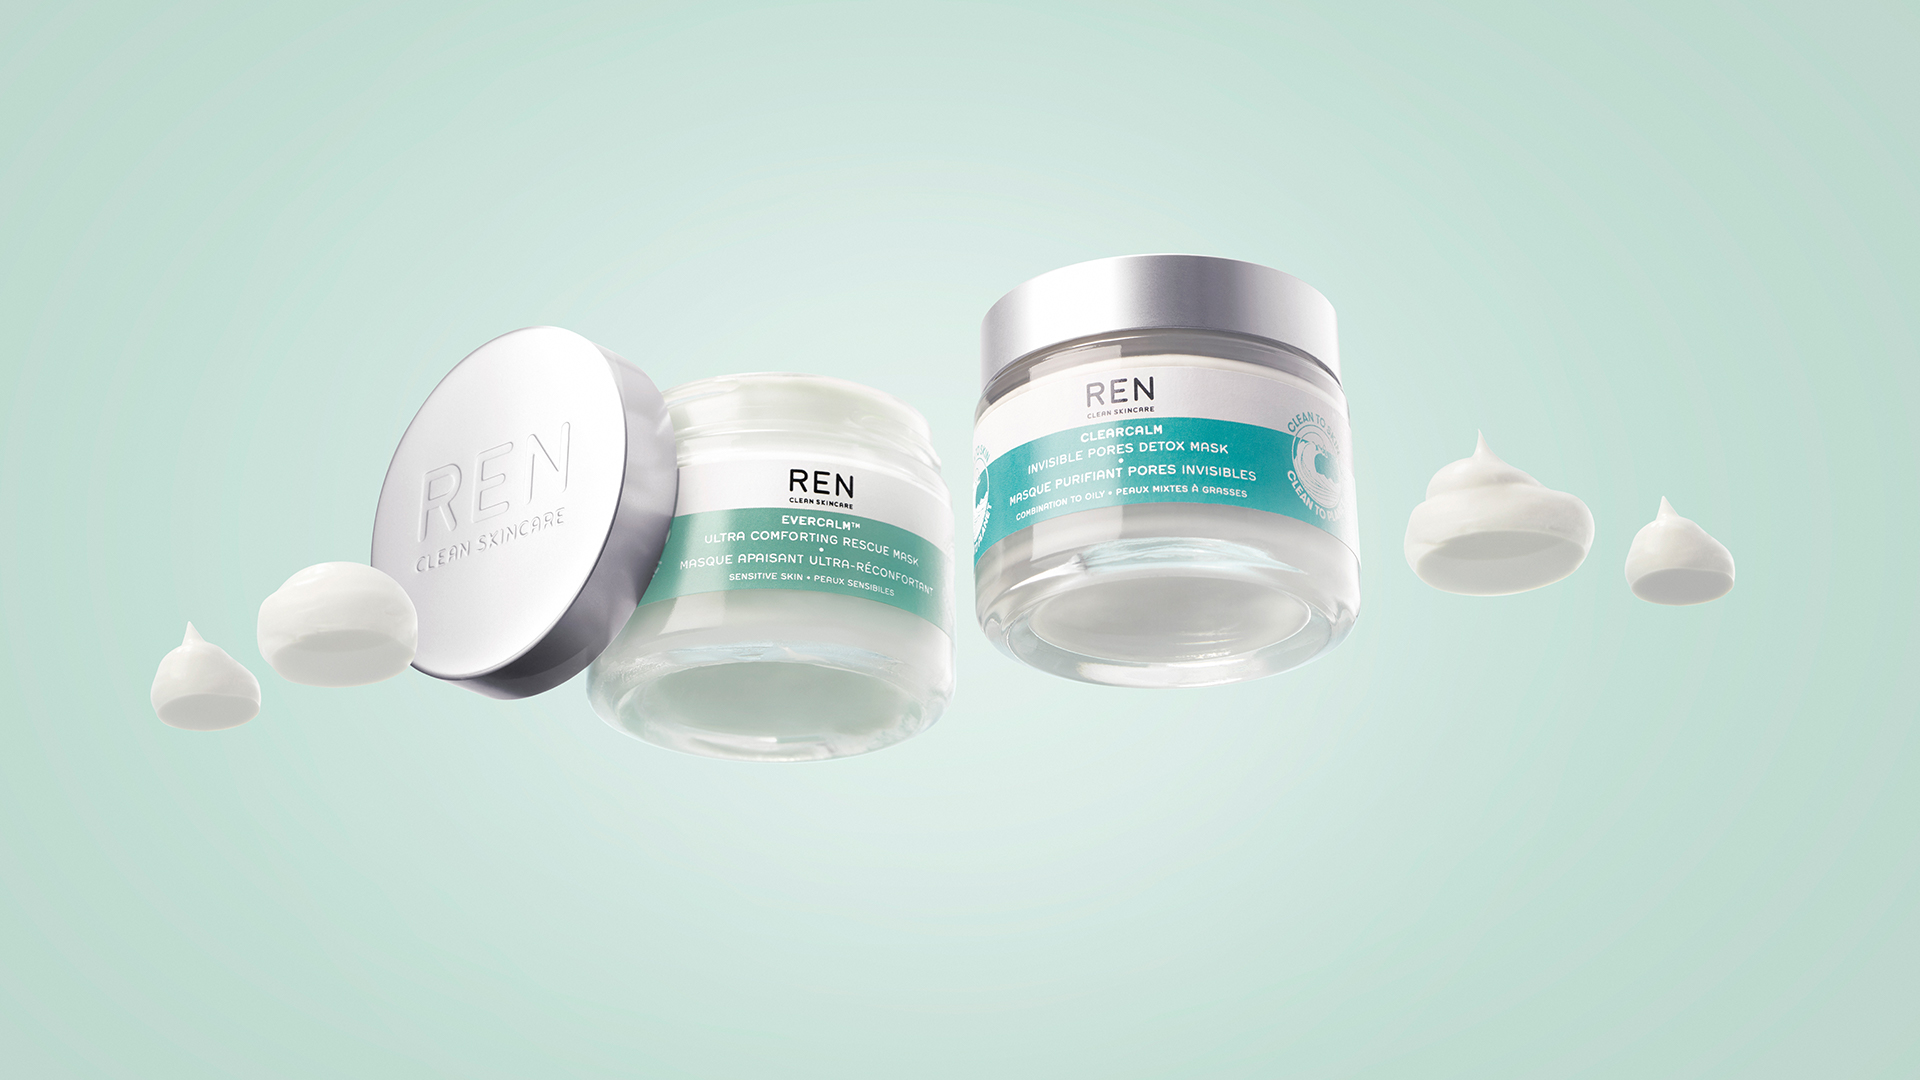 REN Clean elevates packaging with materials - TheIndustry.beauty